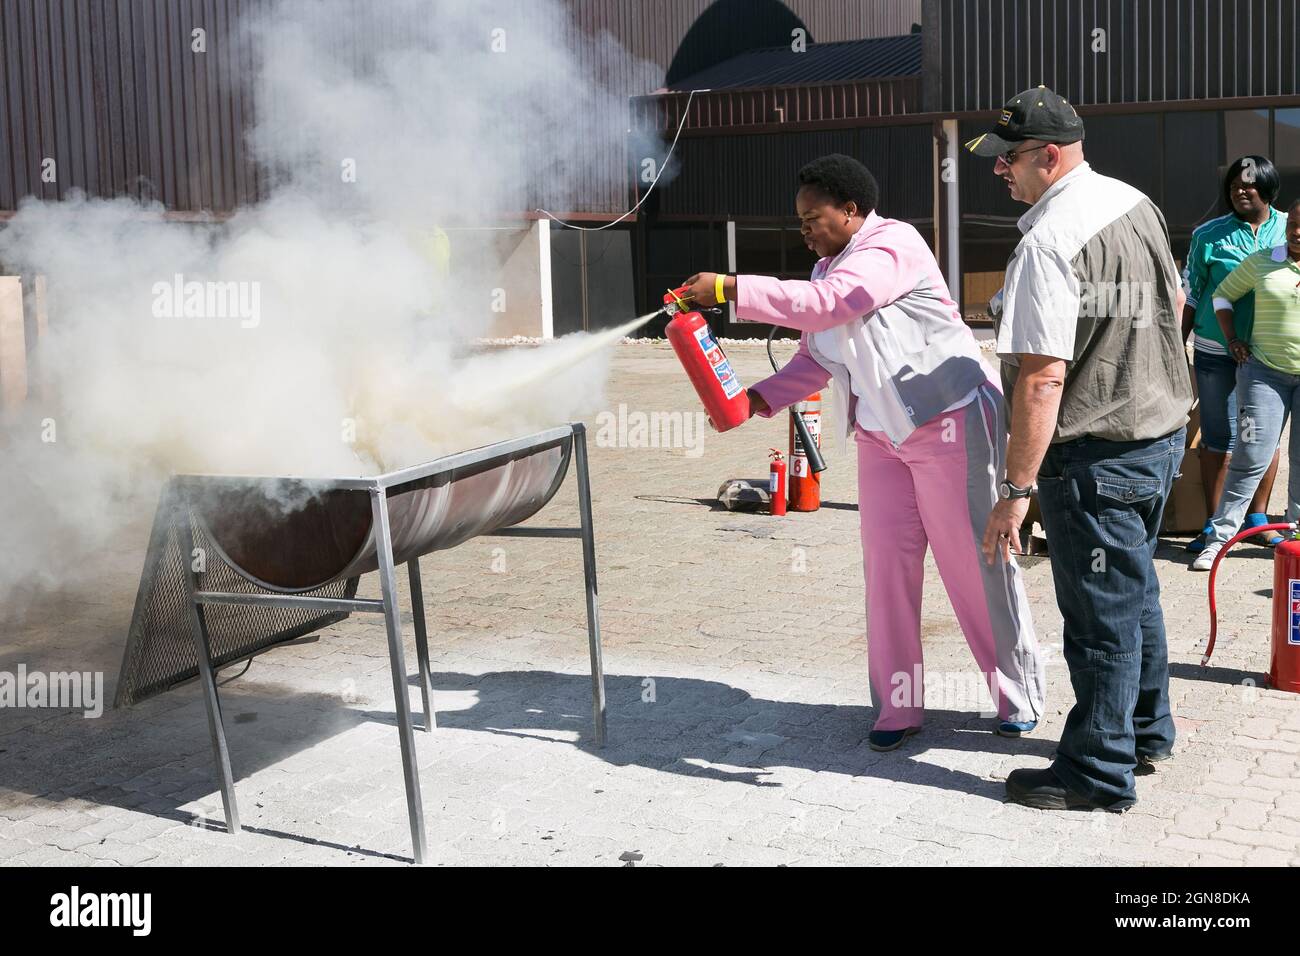 JOHANNESBURG, SOUTH AFRICA - Aug 12, 2021: The Fire hazard training with a powder-based extinguisher Stock Photo